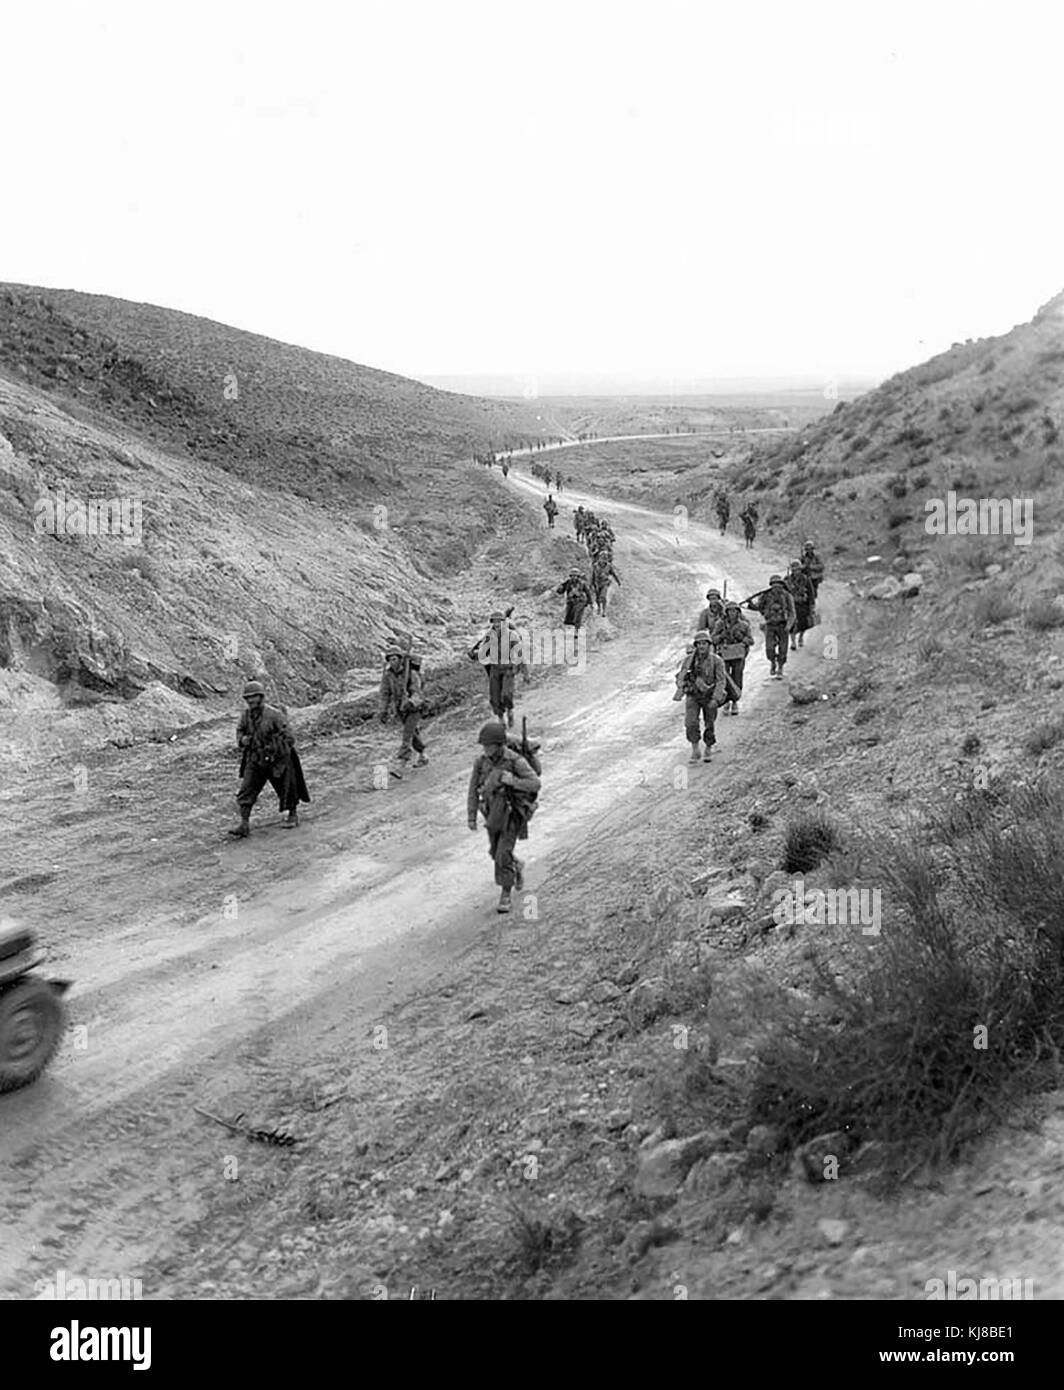 2nd Battalion, 16th Infantry clearing the way and clearing mines, walking through the Kasserine Pass, Tunisia. 26 Feb 1943. World War II Stock Photo